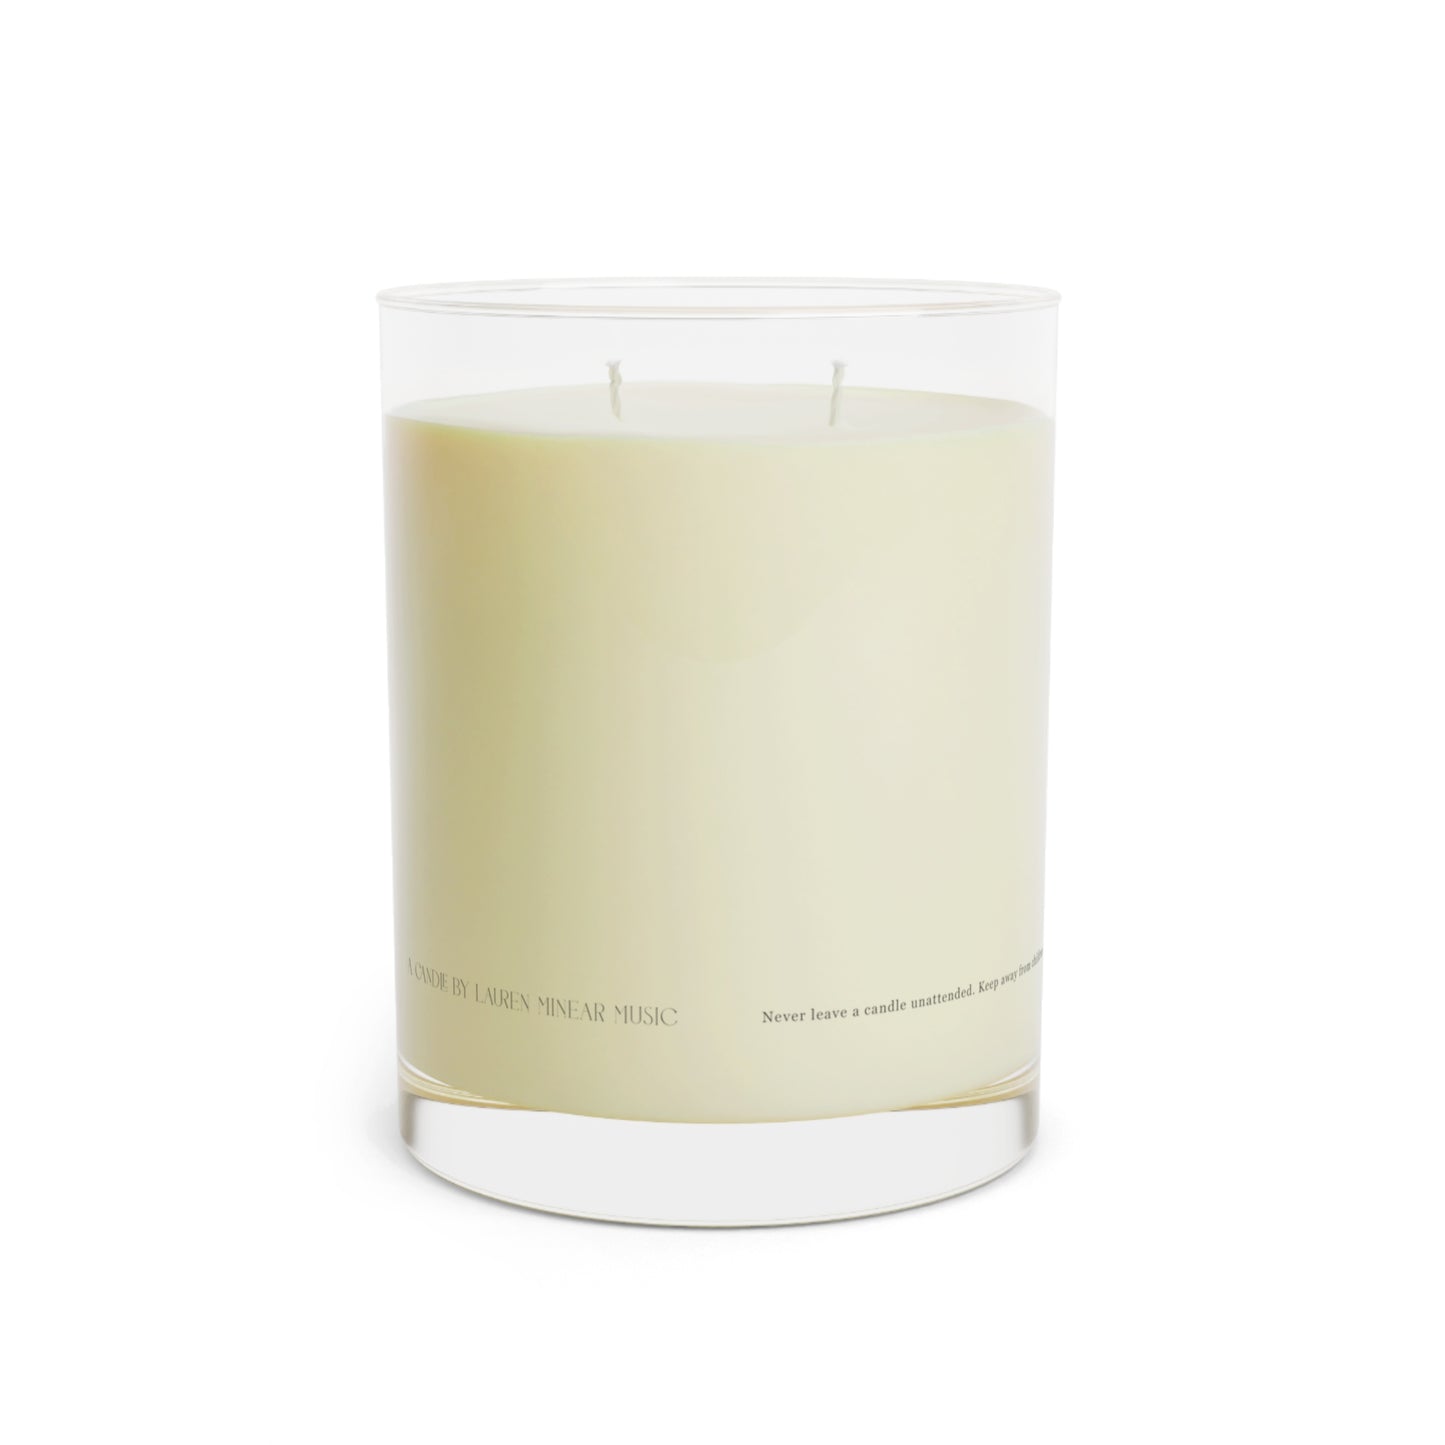 Scents of old, rich, white men - Ocean Mist and Moss Scented Candle